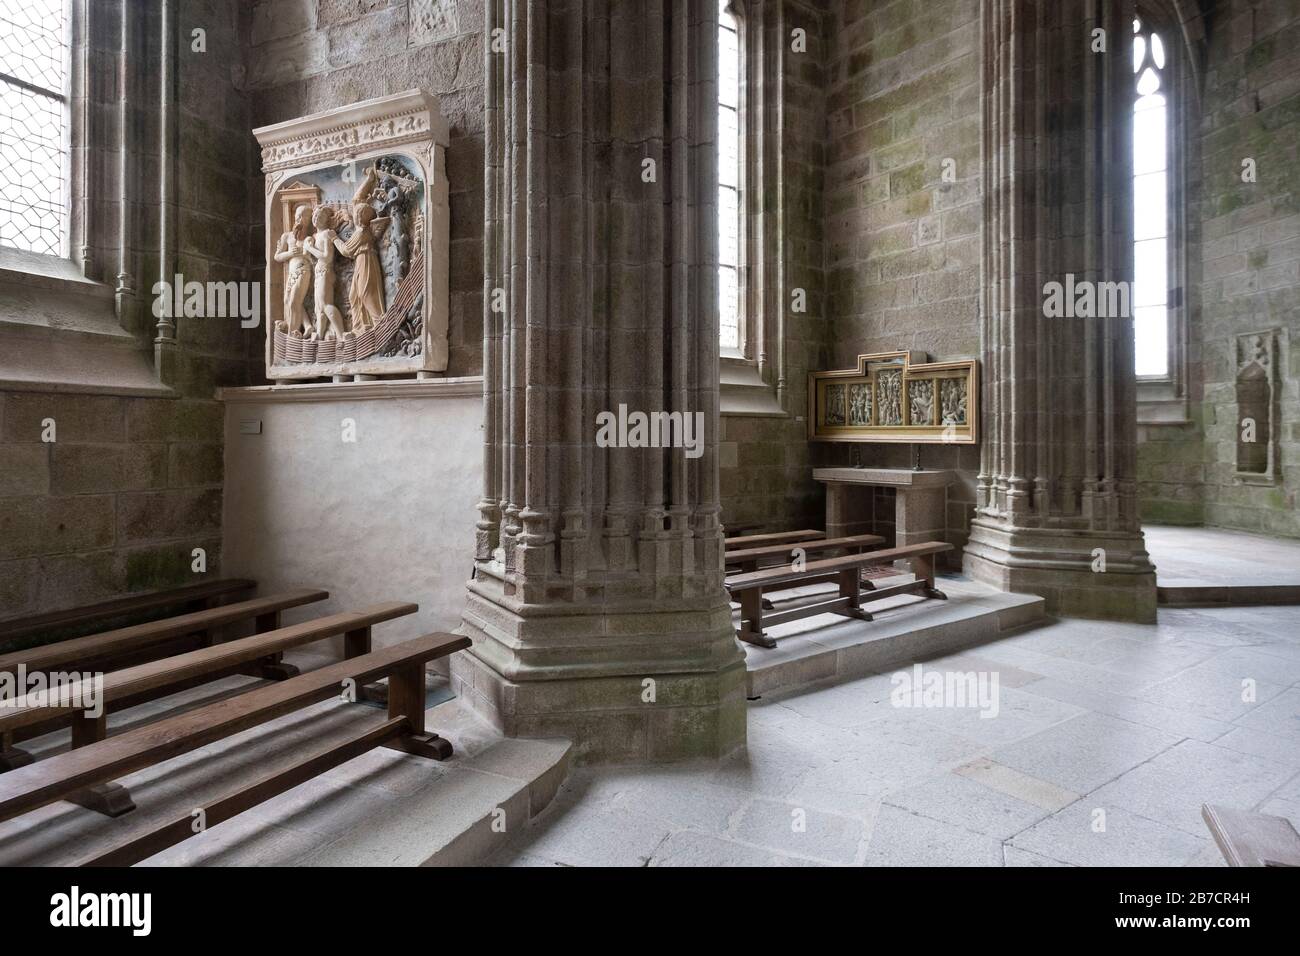 Pews and religious art inside the abbey at Mont Saint-Michel, Normandy, France, Europe Stock Photo